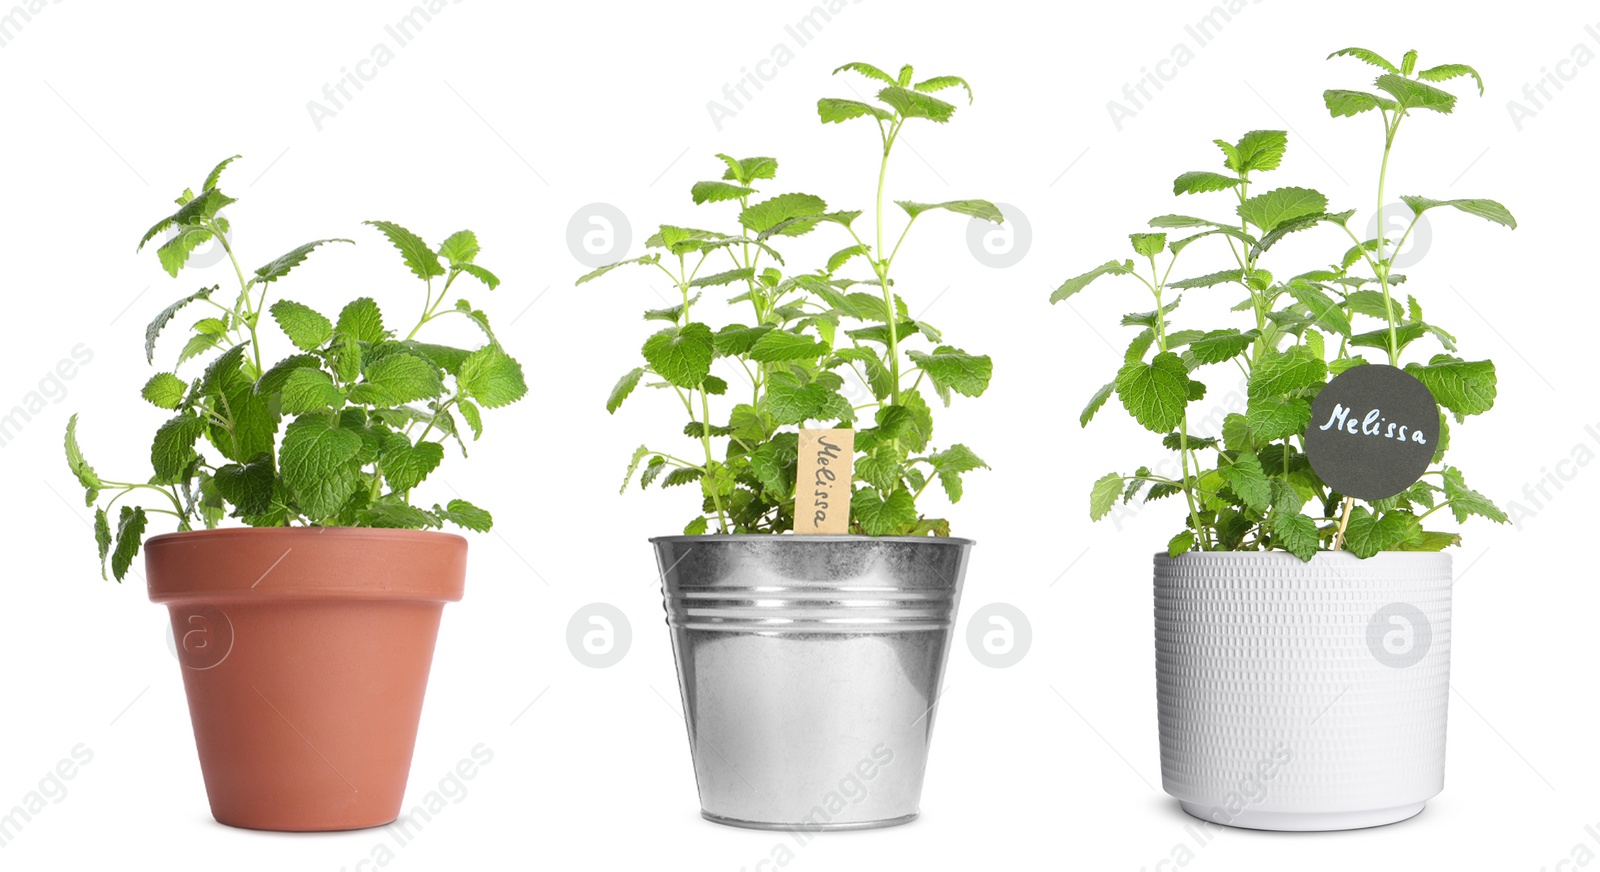 Image of Lemon balm (Melissa) plants growing in different pots isolated on white